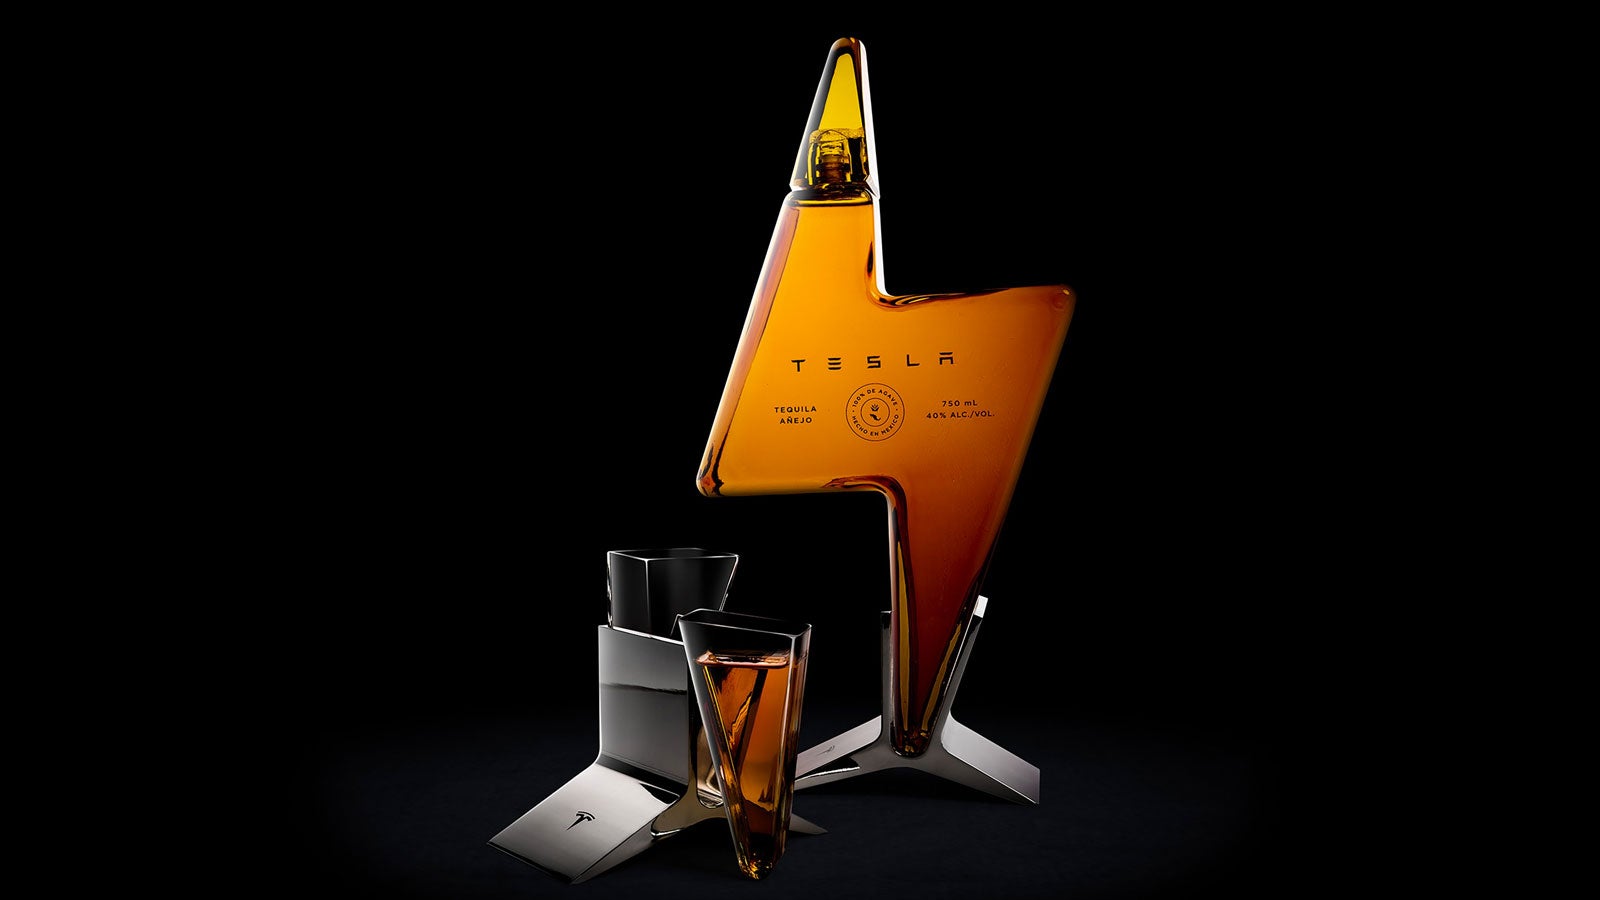 Tesla’s New Tequila Glasses Are Designed to Ruin Your Tequila Drinking Experience